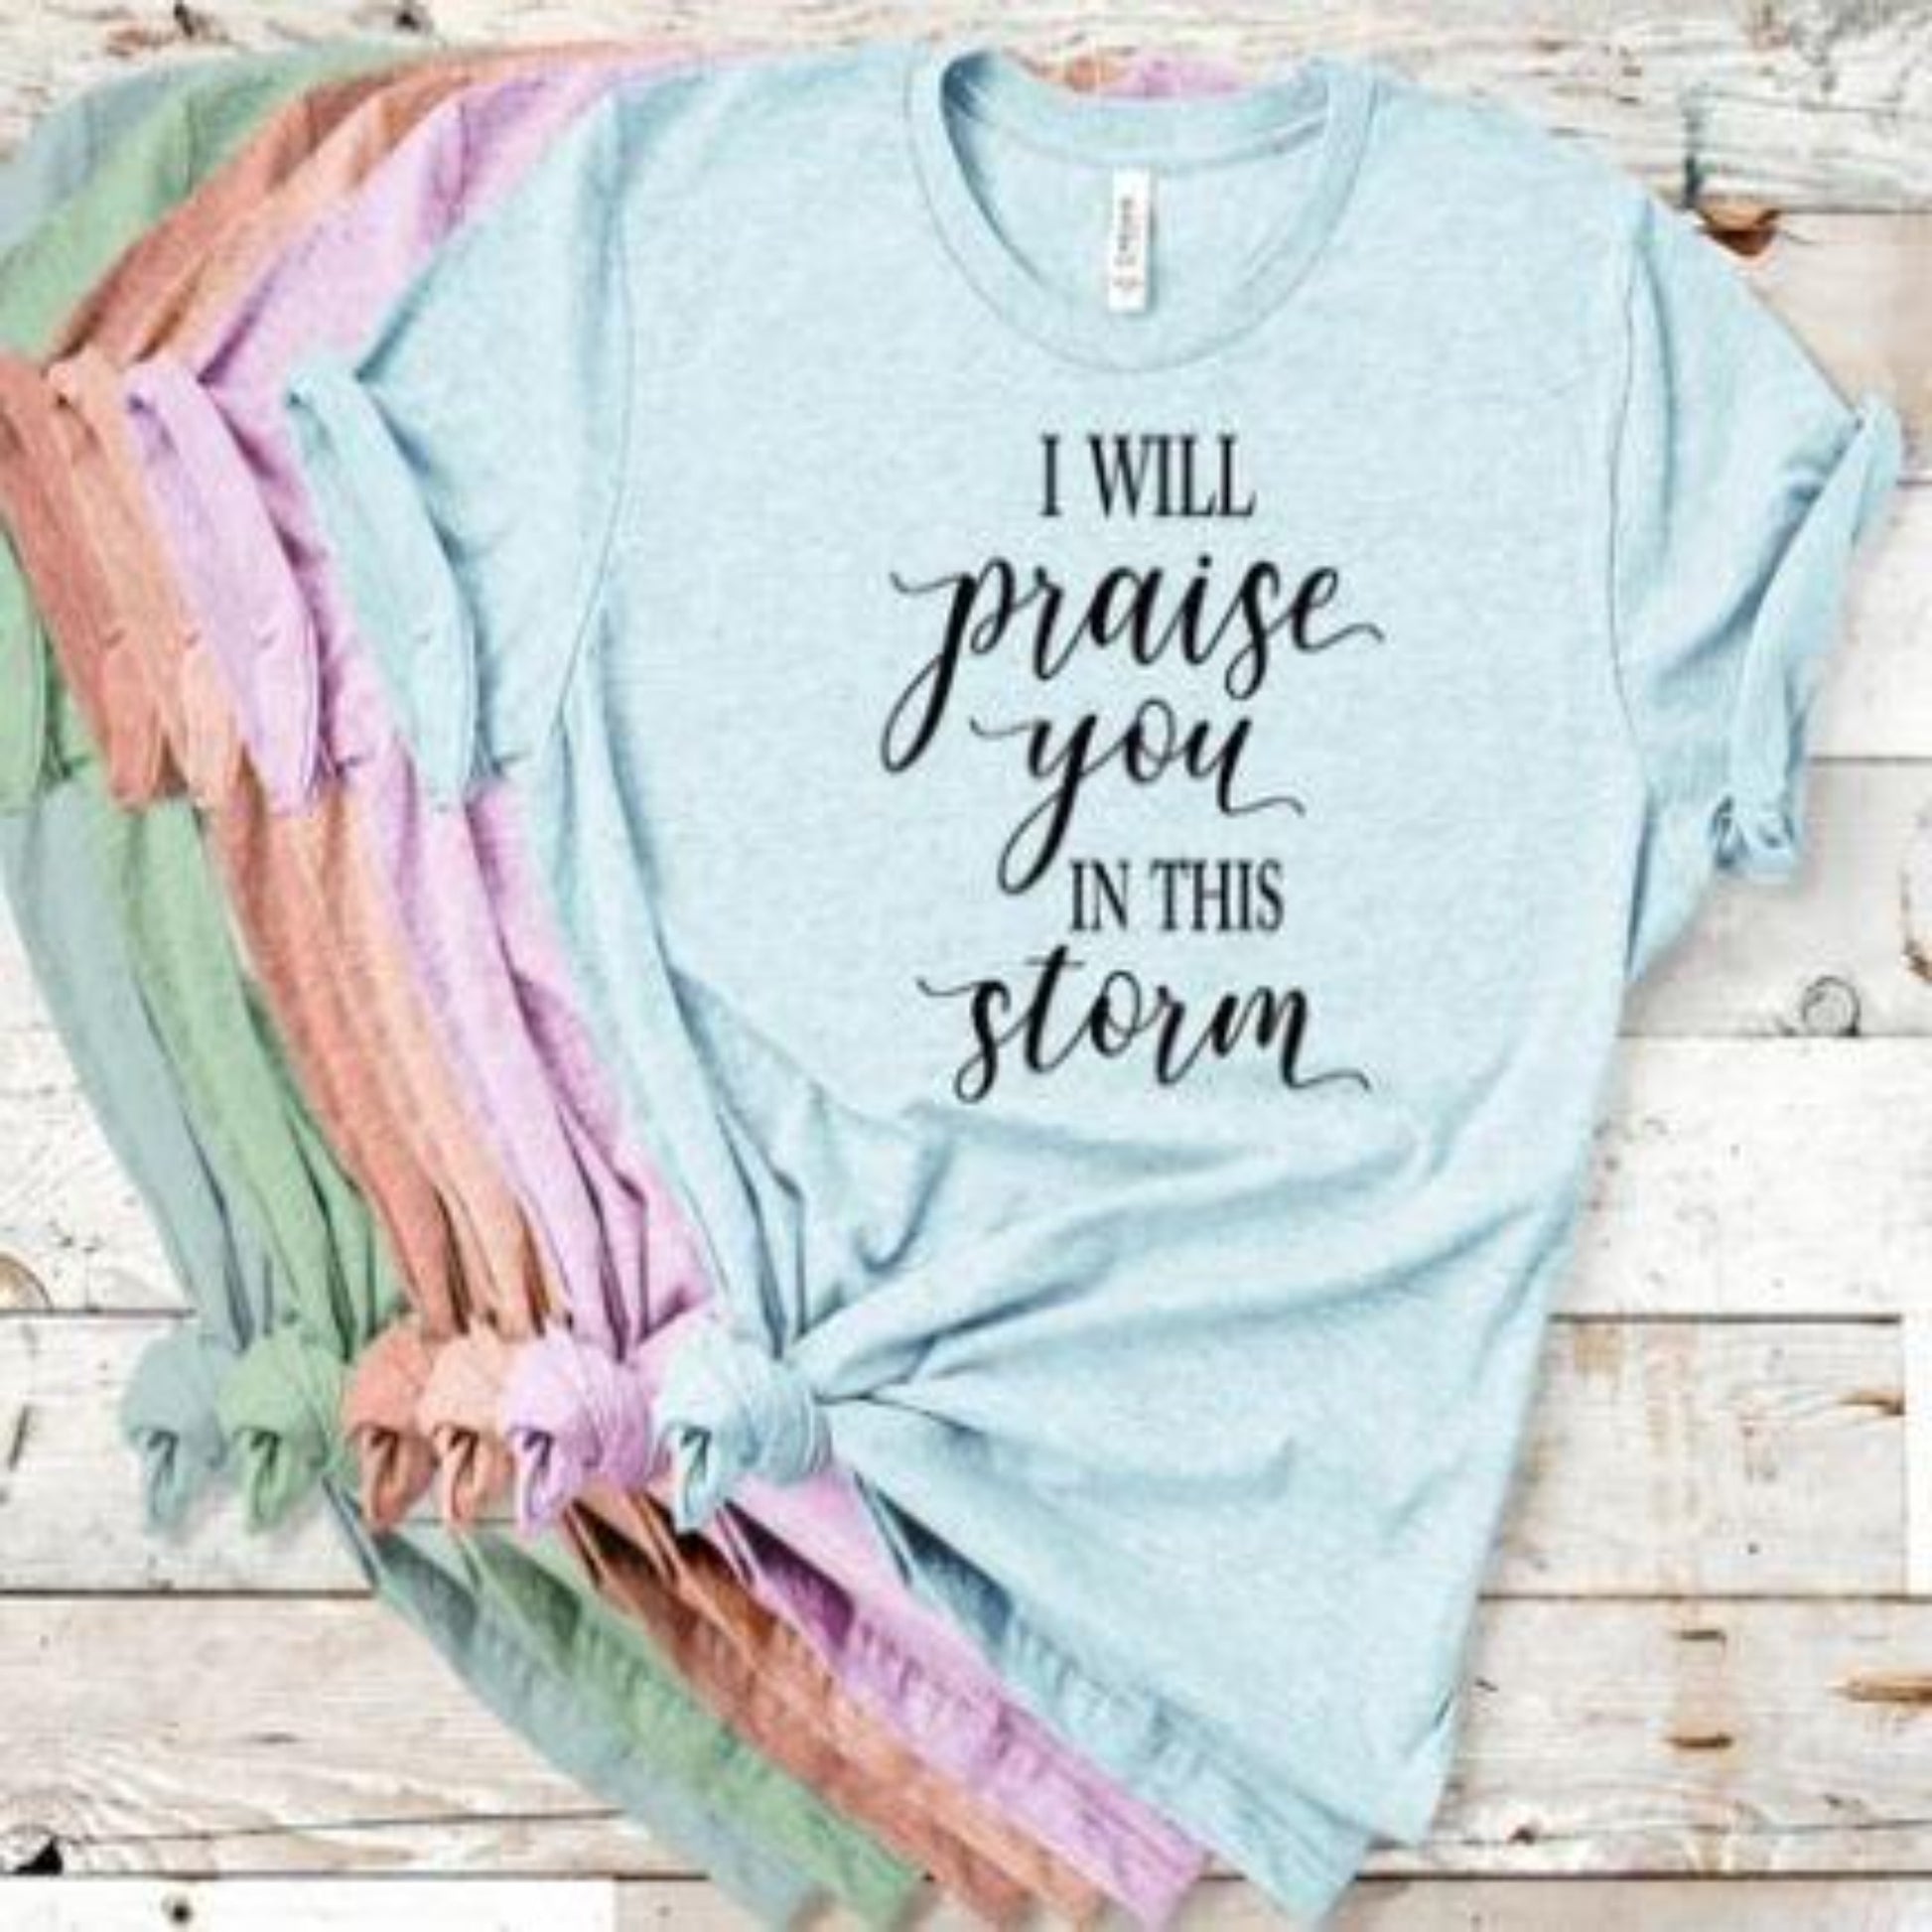 praise_You_in_this_storm specialty tee  christian wear comfortable shirt everyday tshirt